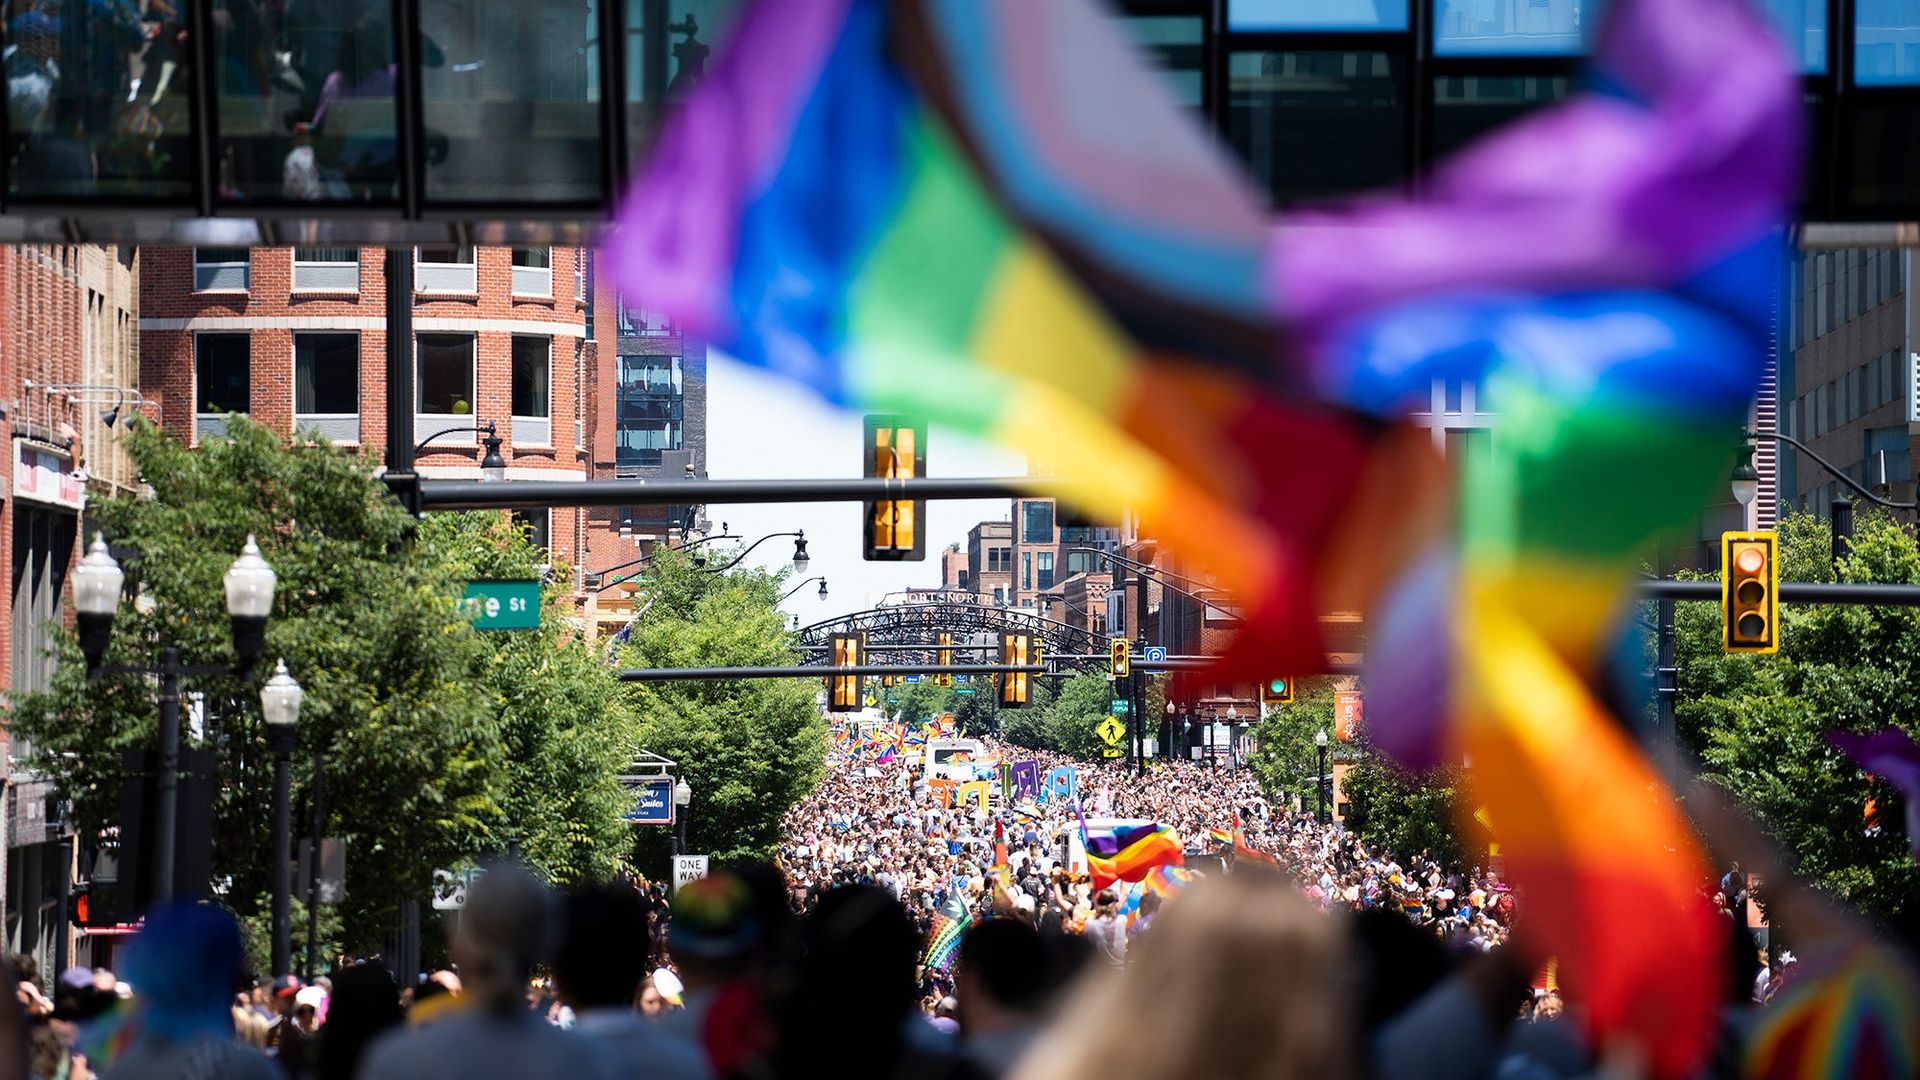 An overview of the Pride March with a flag in the foreground